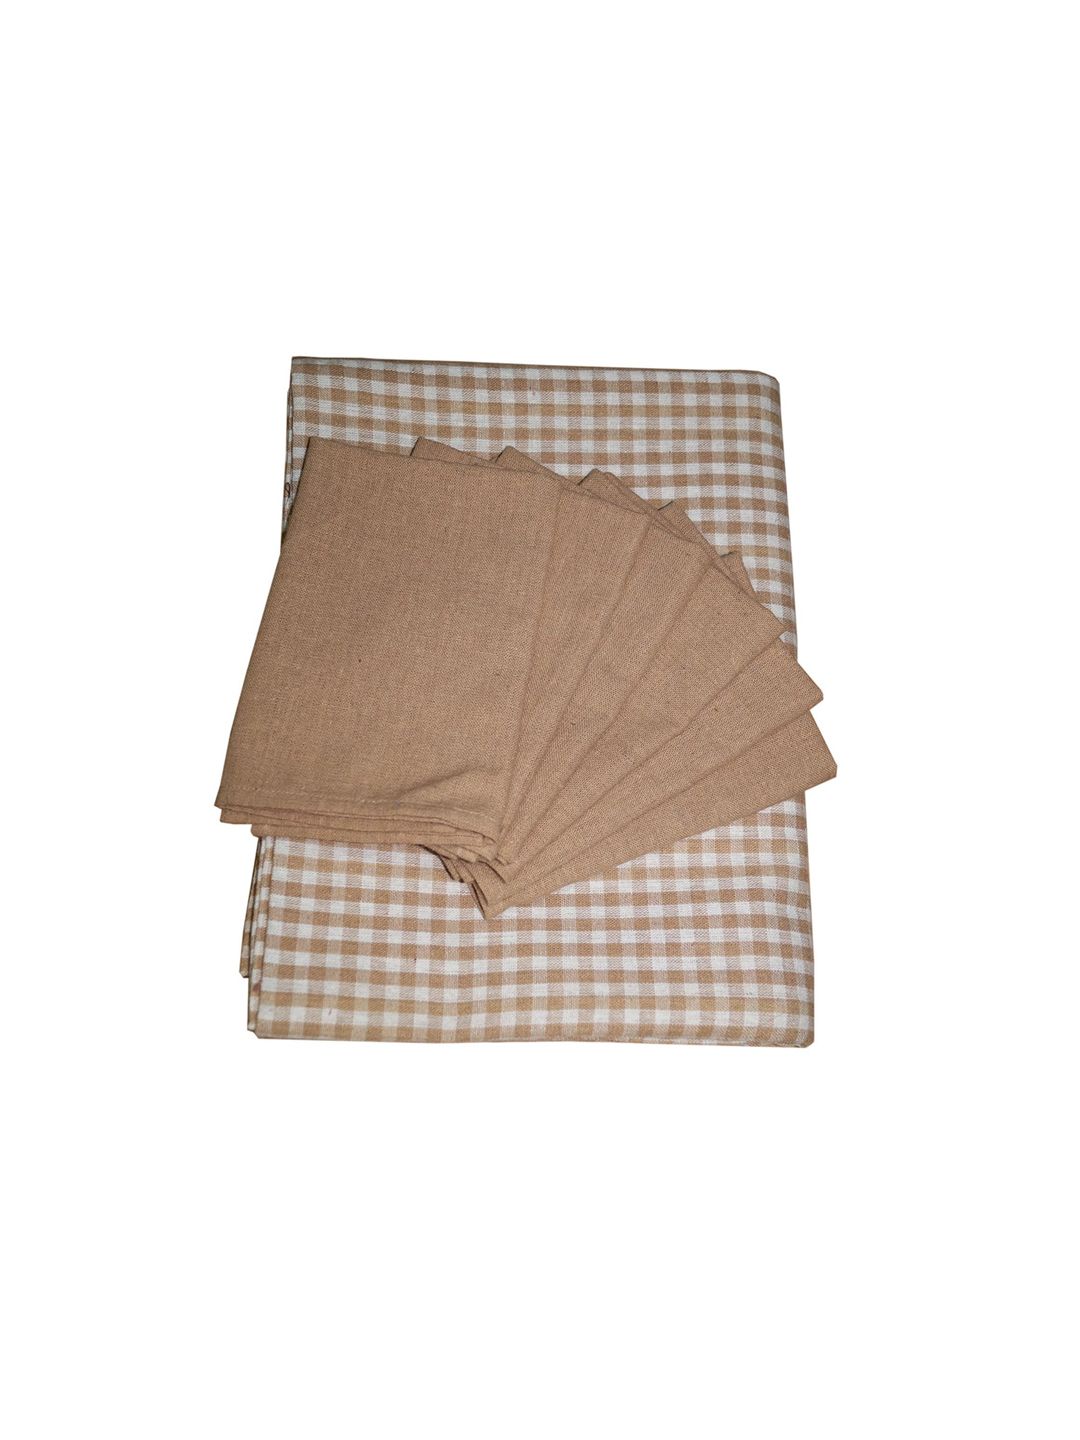 Lushomes Biscuit Cotton Checks Dining Table Covers with 6 pcs Table Napkins Price in India